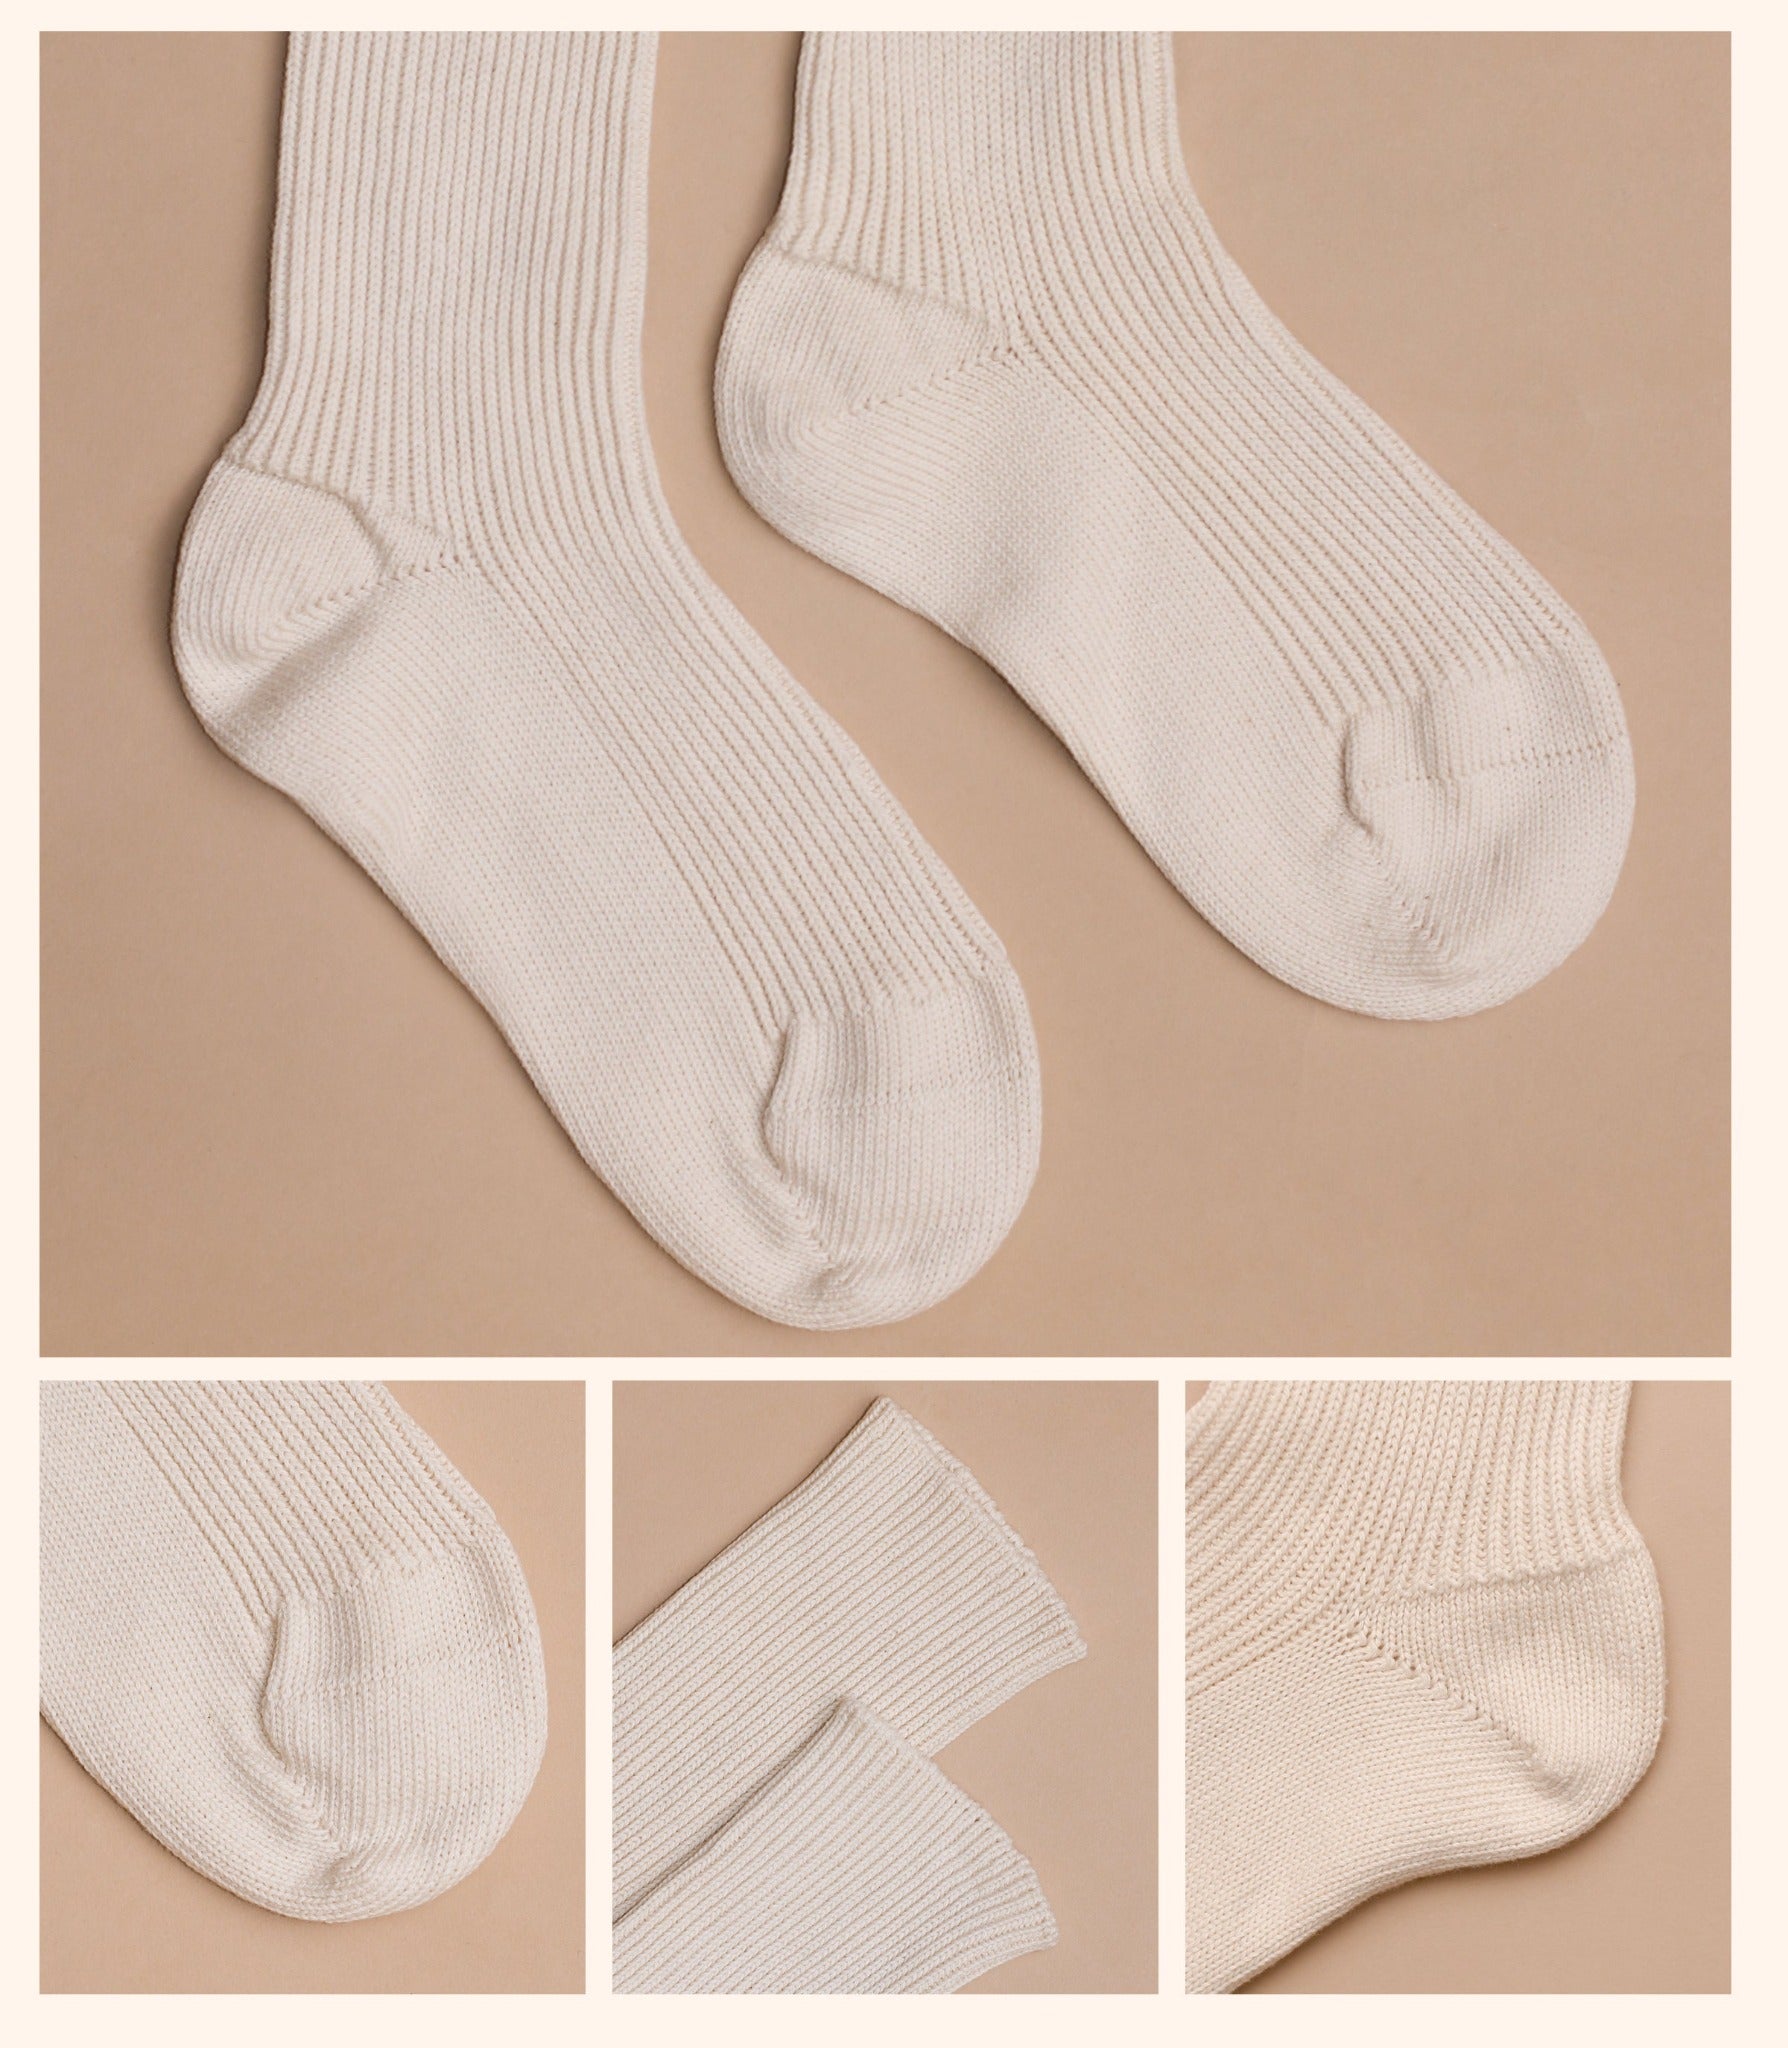 6 Pairs Unisex Natural Cotton Socks Breathable Soft Organic High